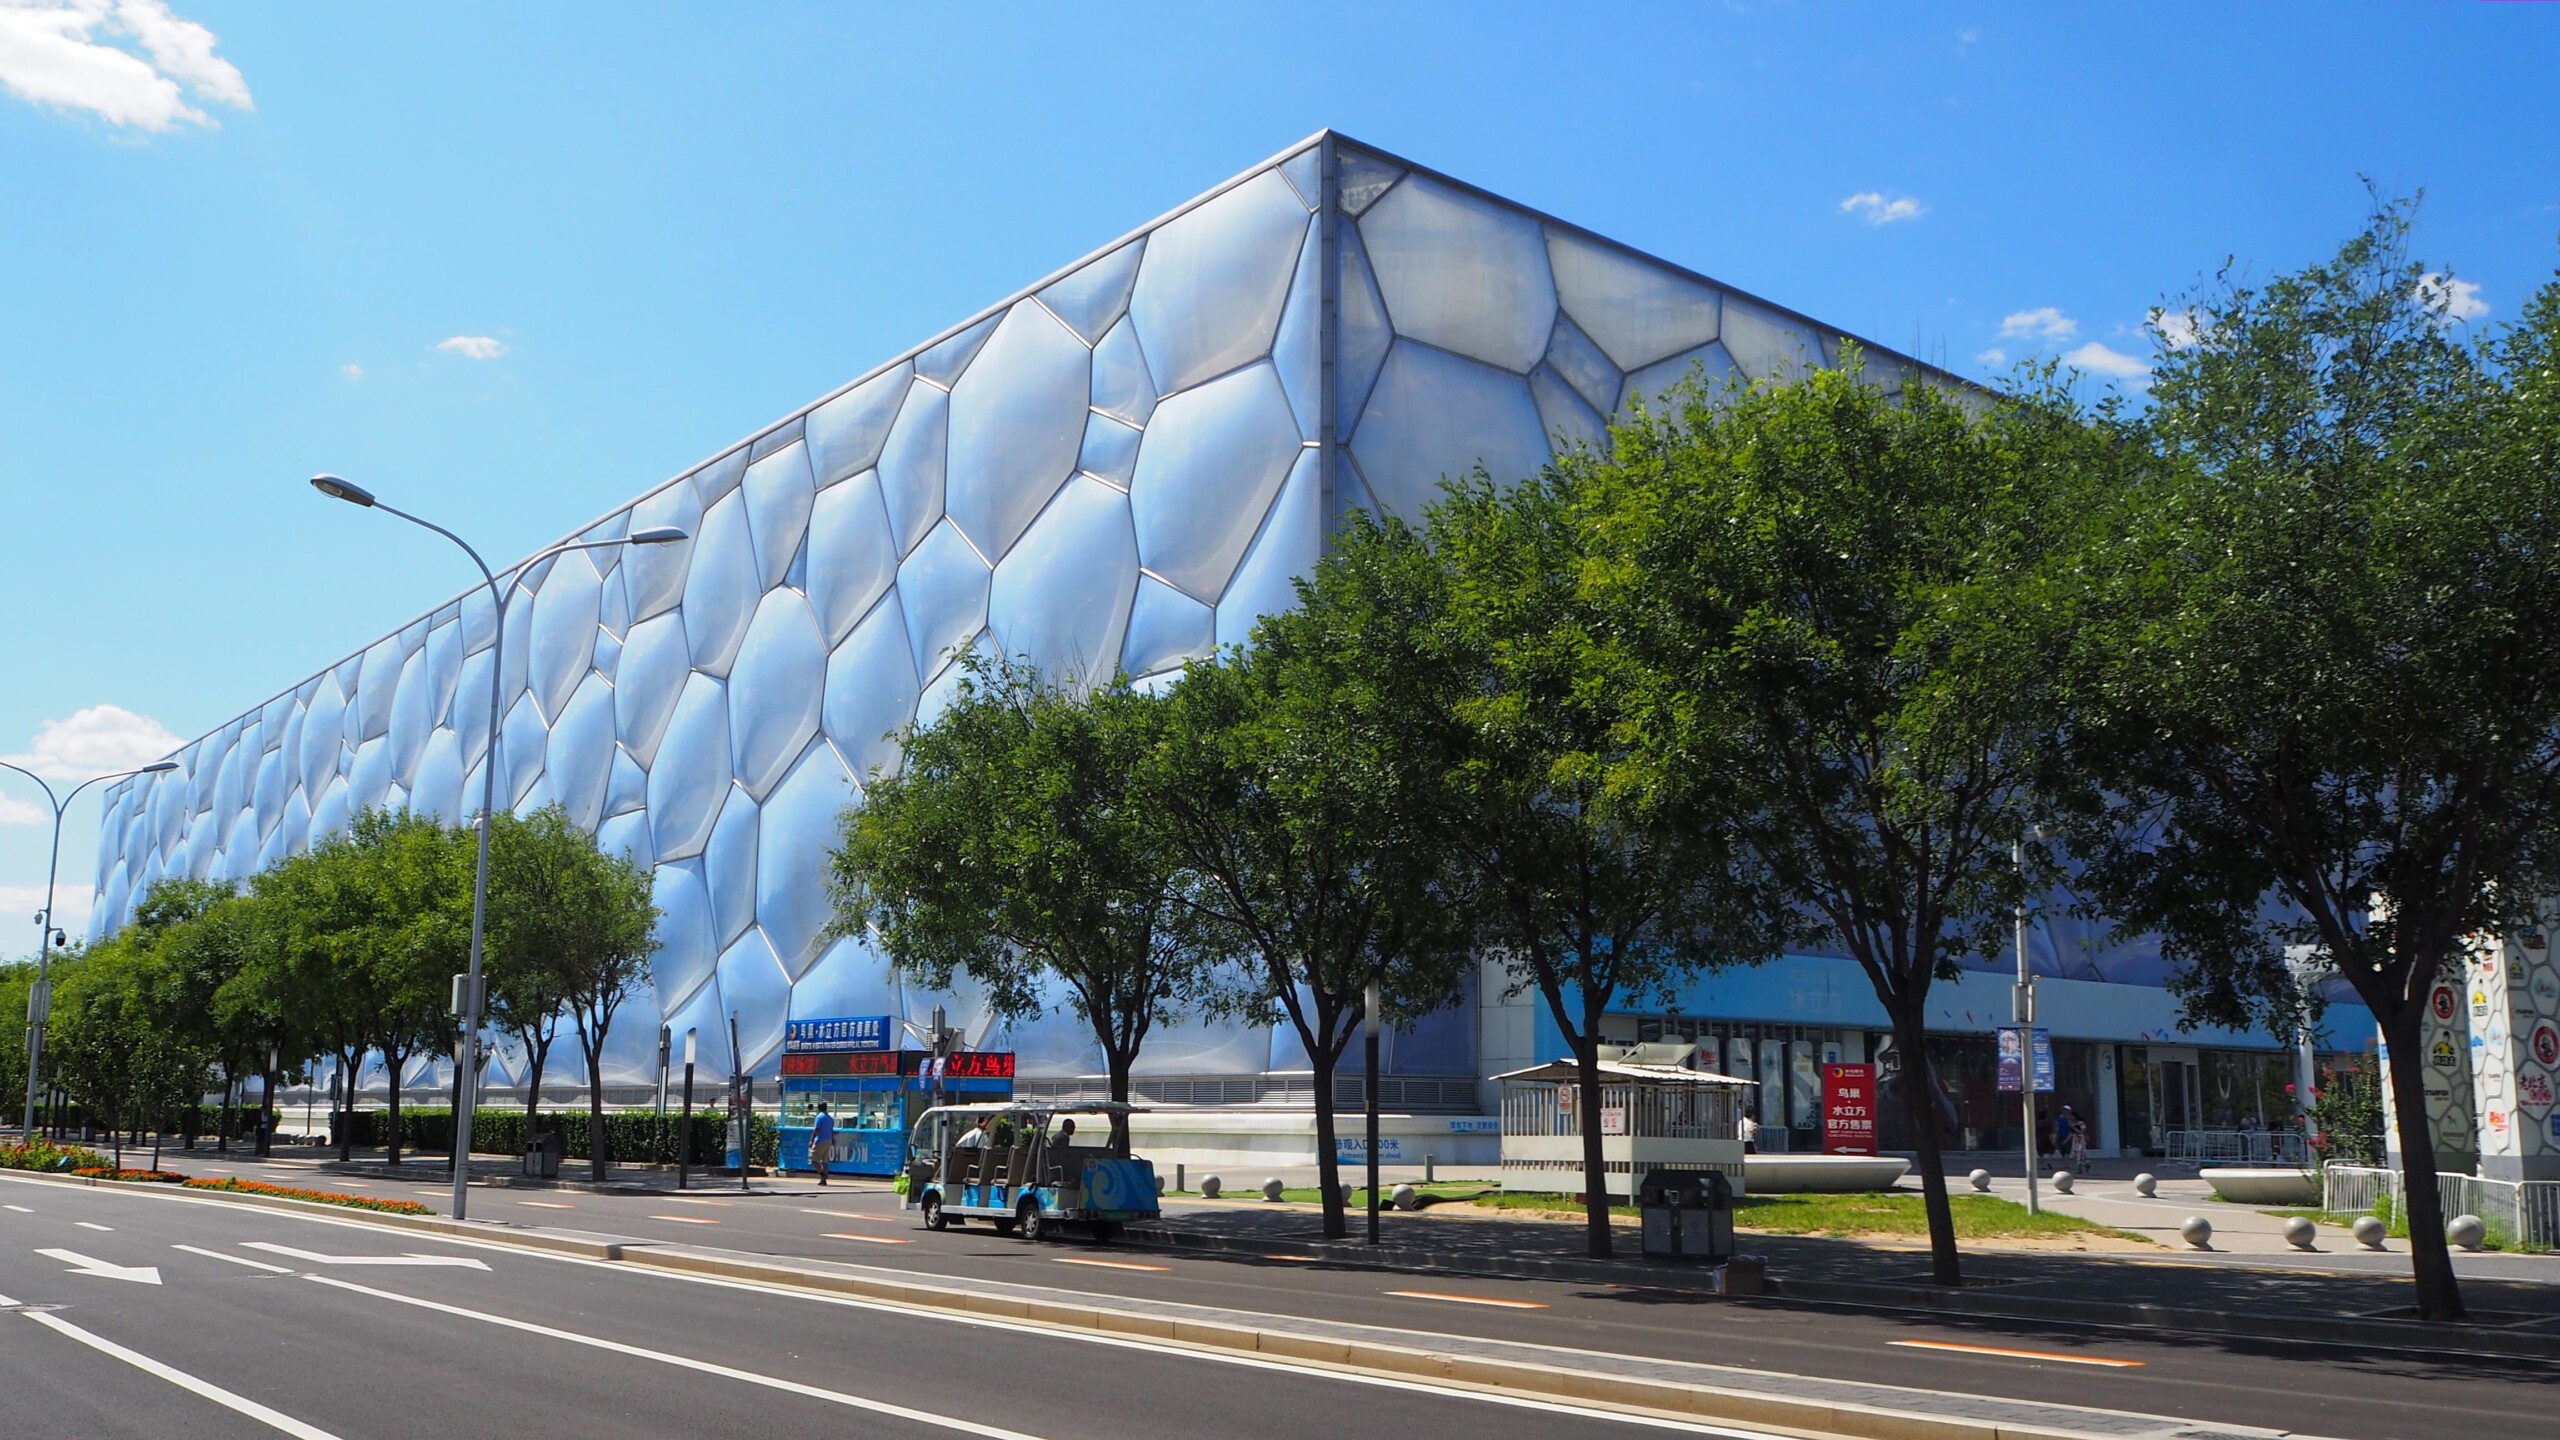 A photo of the outside of the Beijing National Aquatic Centre